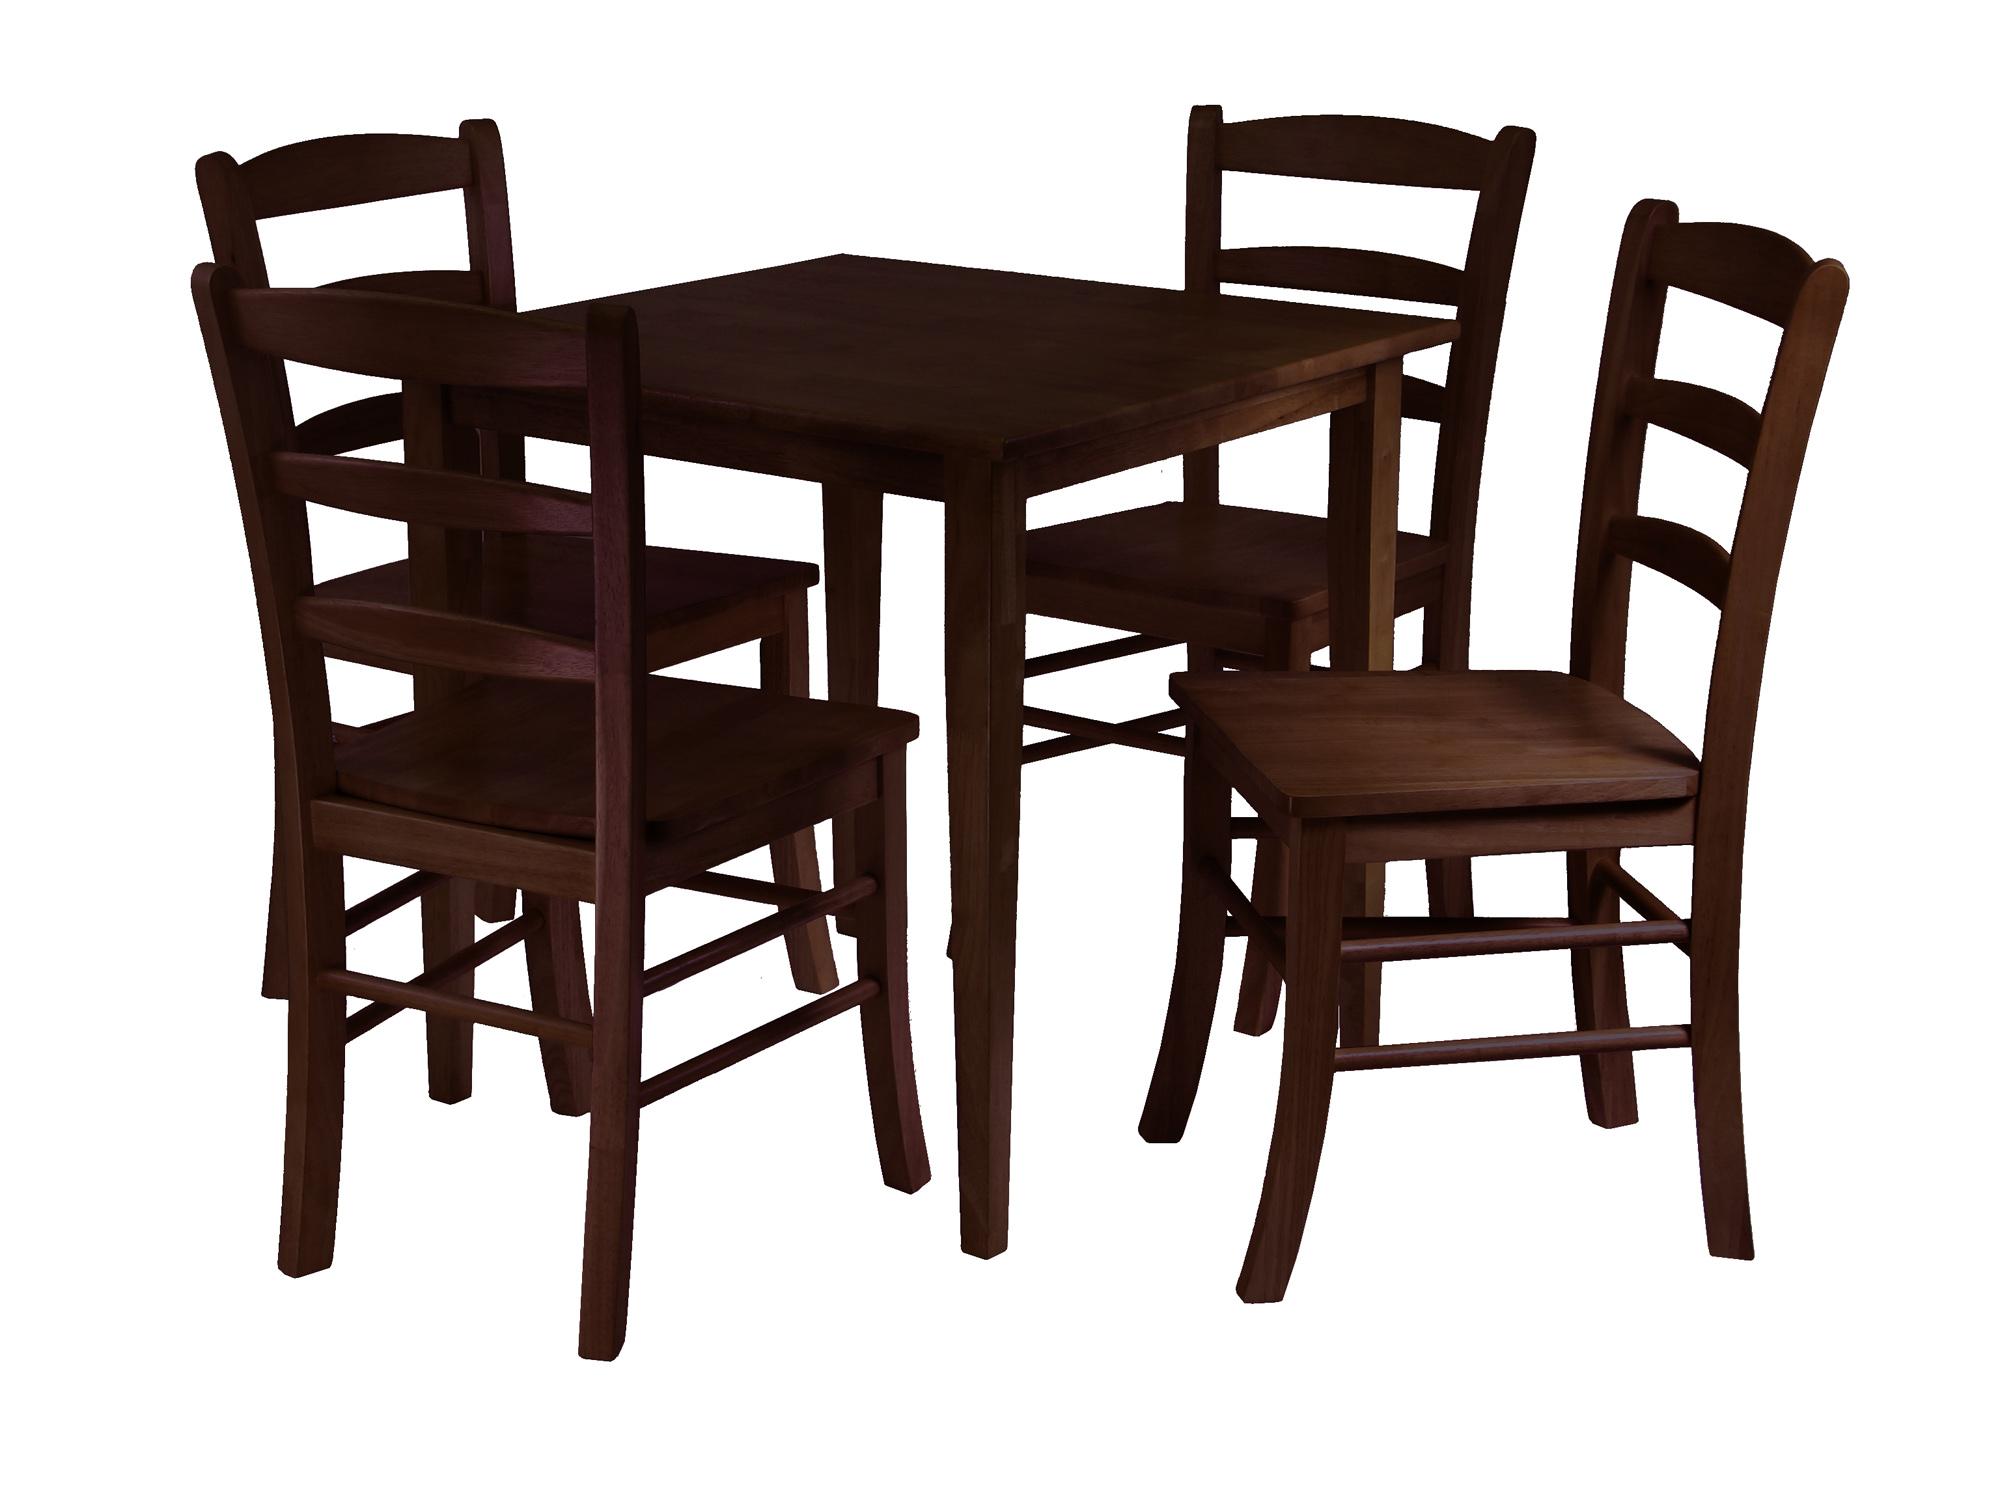 Round Table Clip Art Table And Chairs Clipartsquare Kitchen Tables And